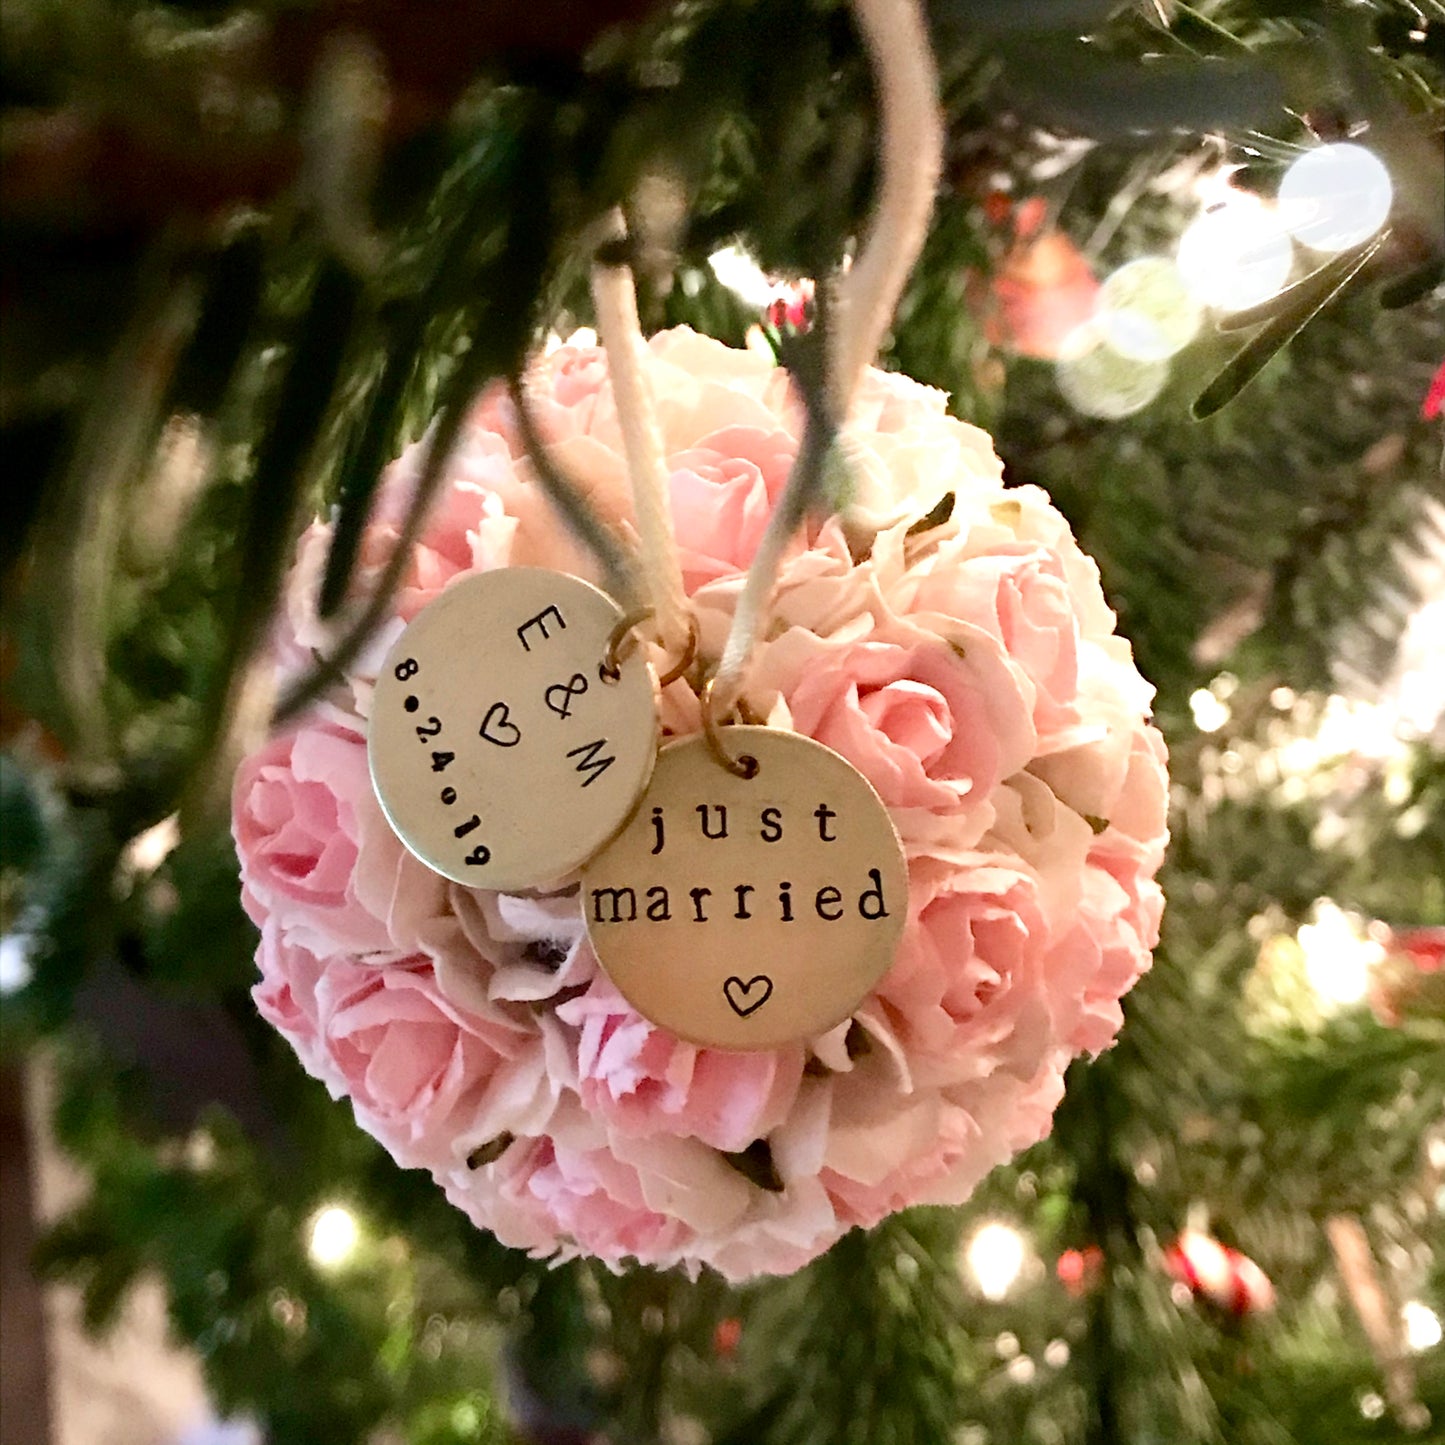 First Married Christmas Ornament